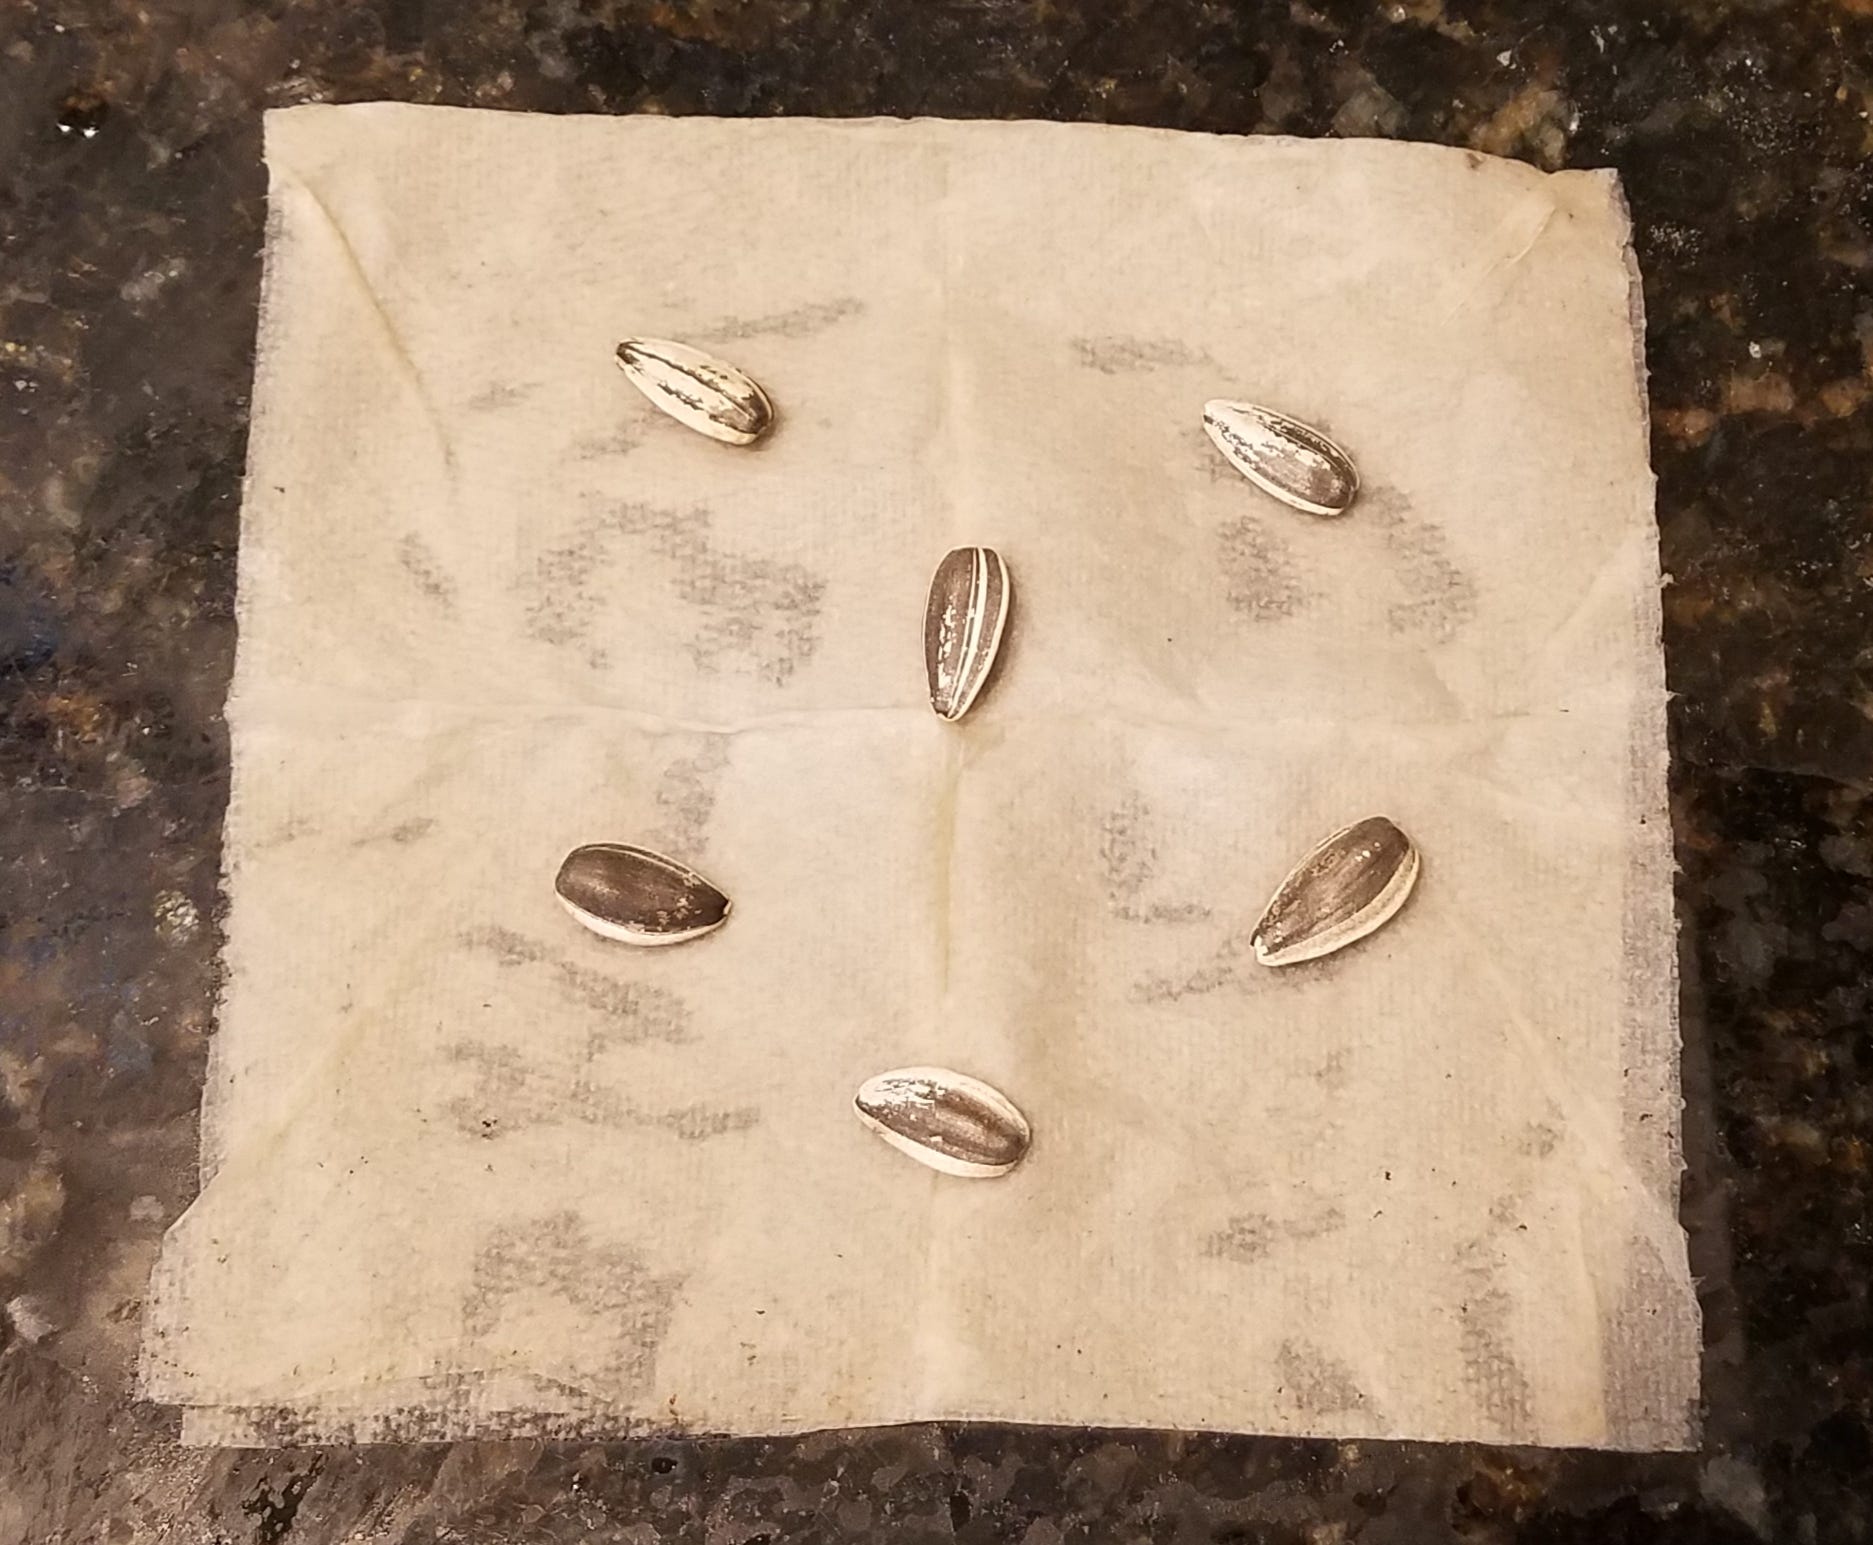 Sally Scalera: Here's an easy, fun way to germinate seeds in a paper towel